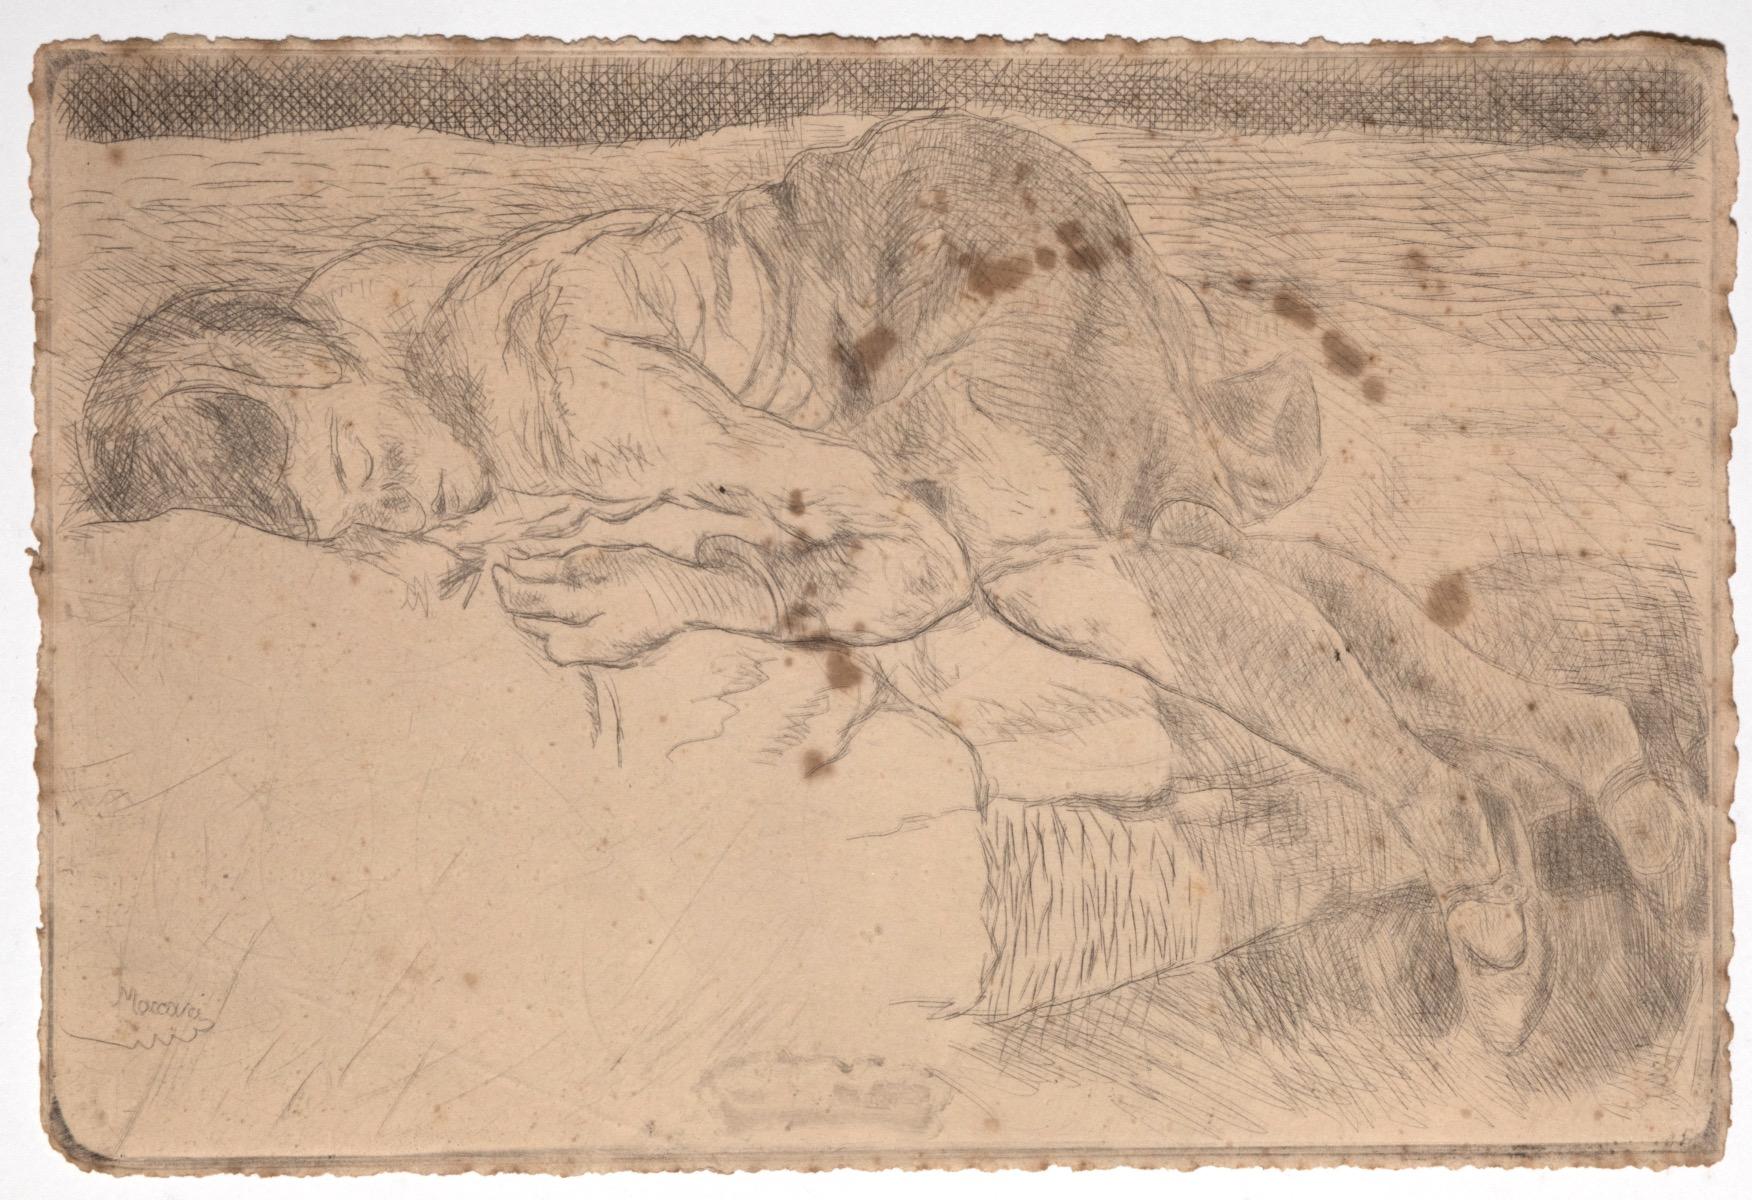 Sleeping Figure is an original modern artwork realized by the Italian artist Mino Maccari (Siena, 1898 - Rome, 1989), in 1925.

Original etching on Ivory paper. 

Excellent conditions. 

This work has been realized by the Italian artist Mino Maccari